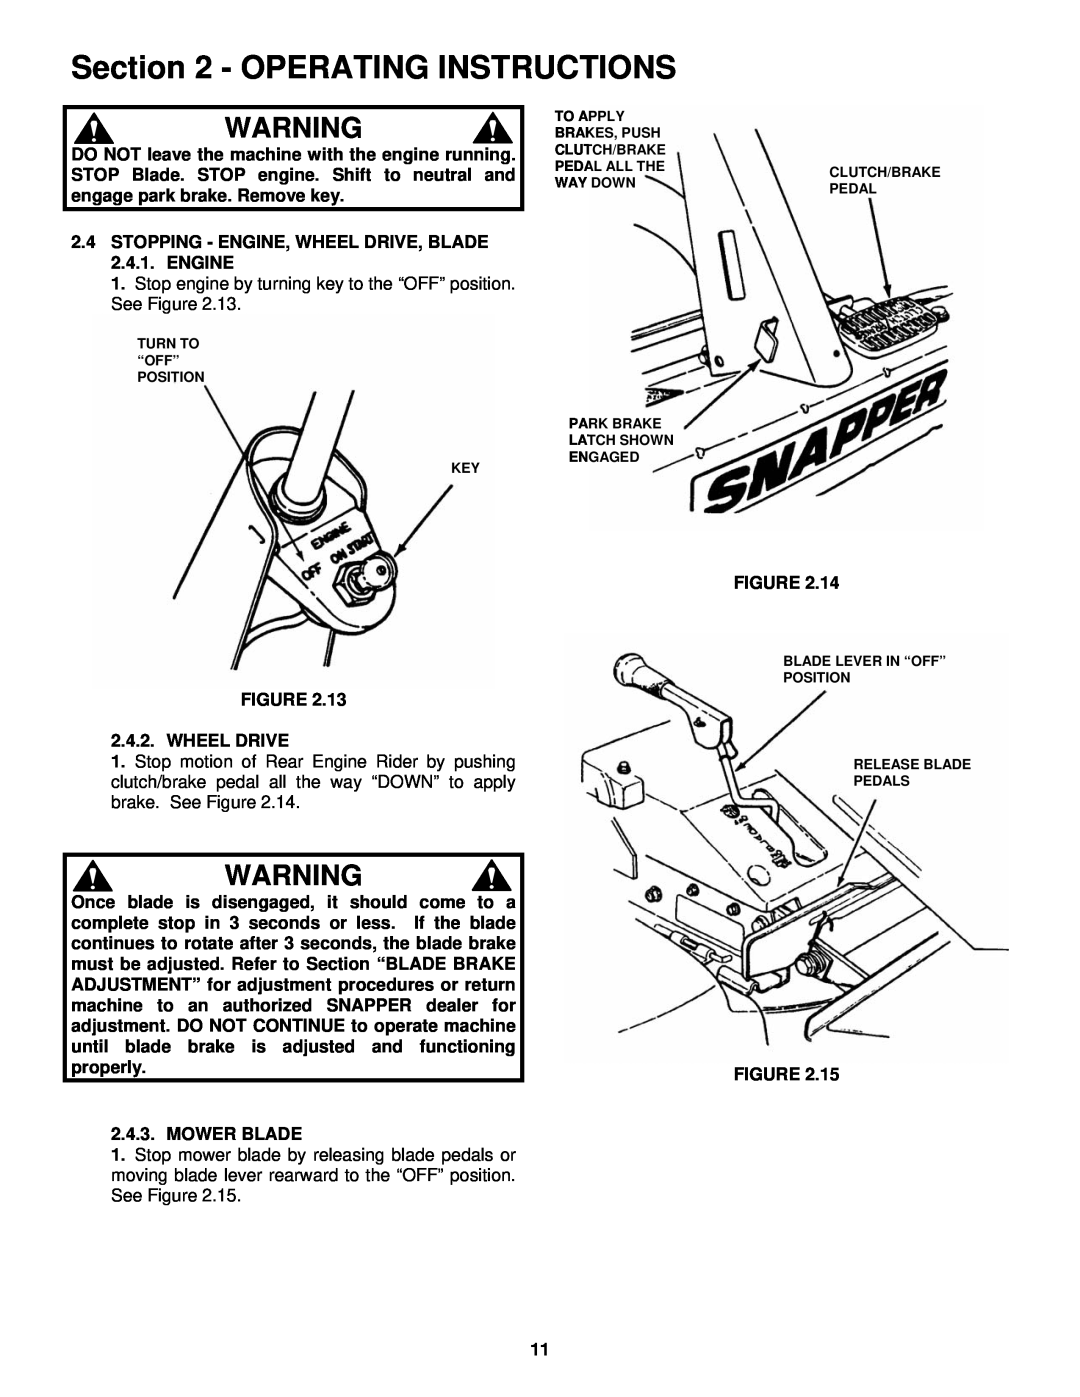 Snapper important safety instructions Operating Instructions, Stop engine by turning key to the “OFF” position. See Figure 